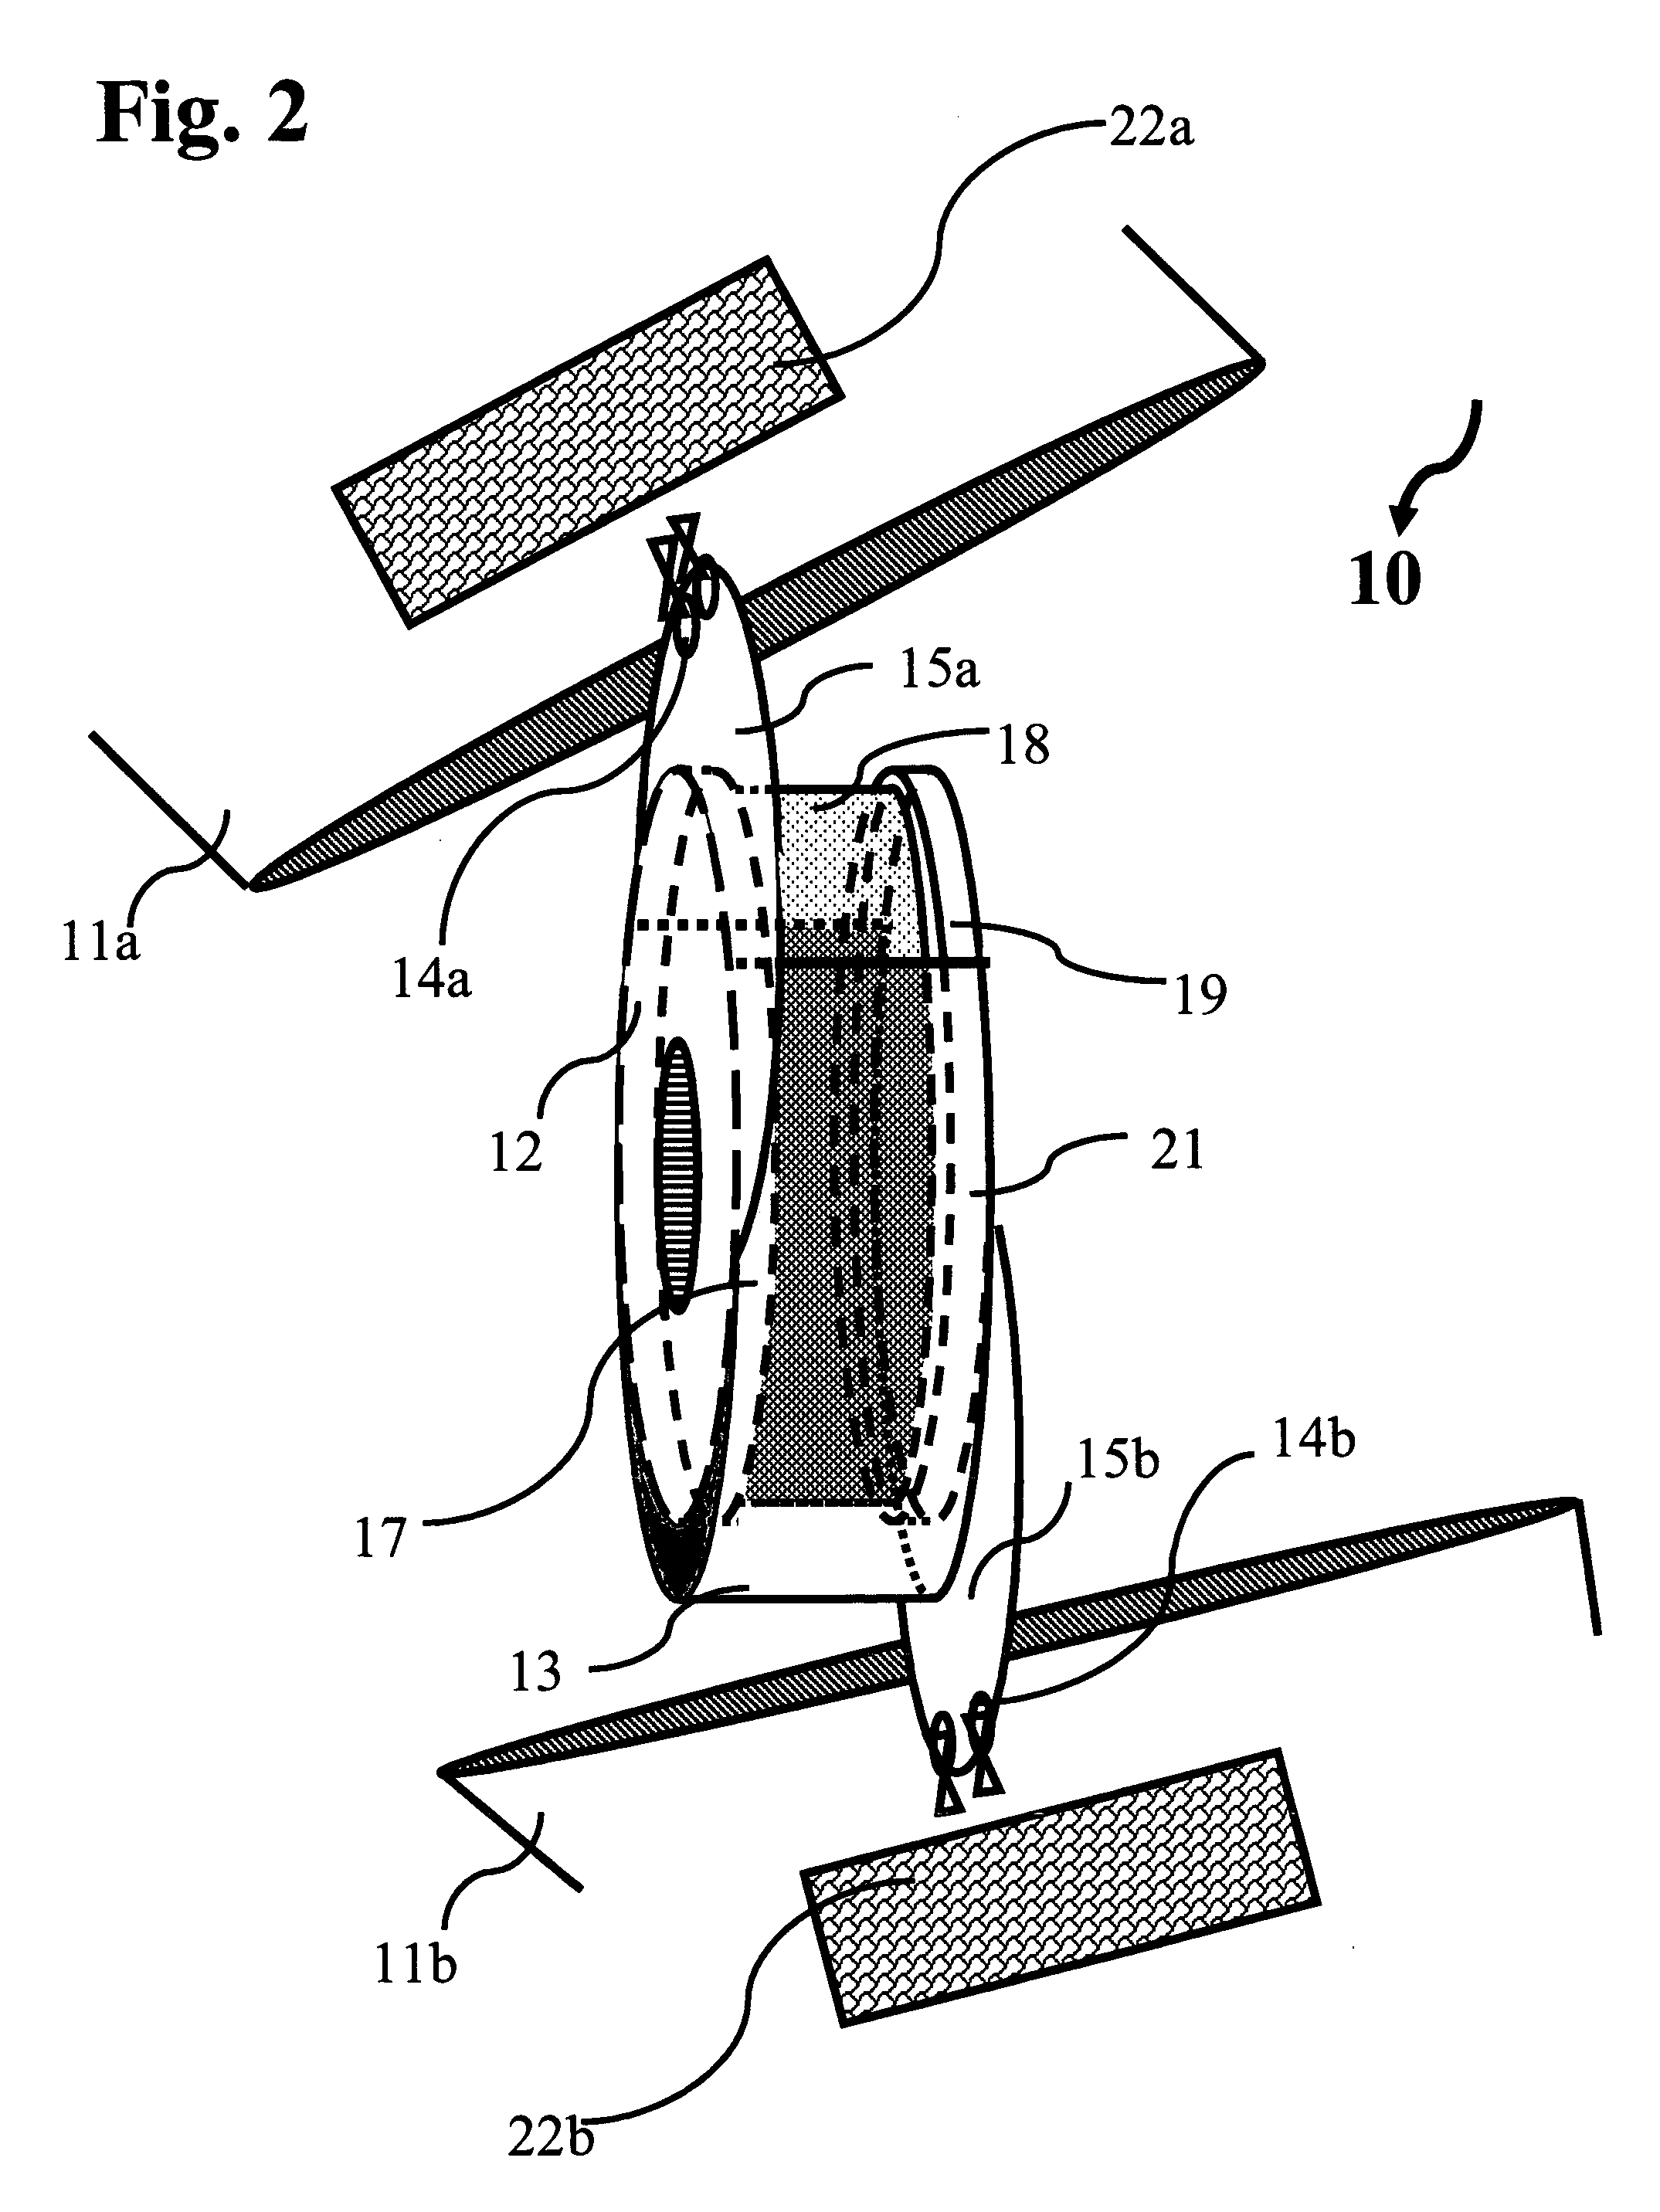 Fastener mechanism for uniting articles of clothing